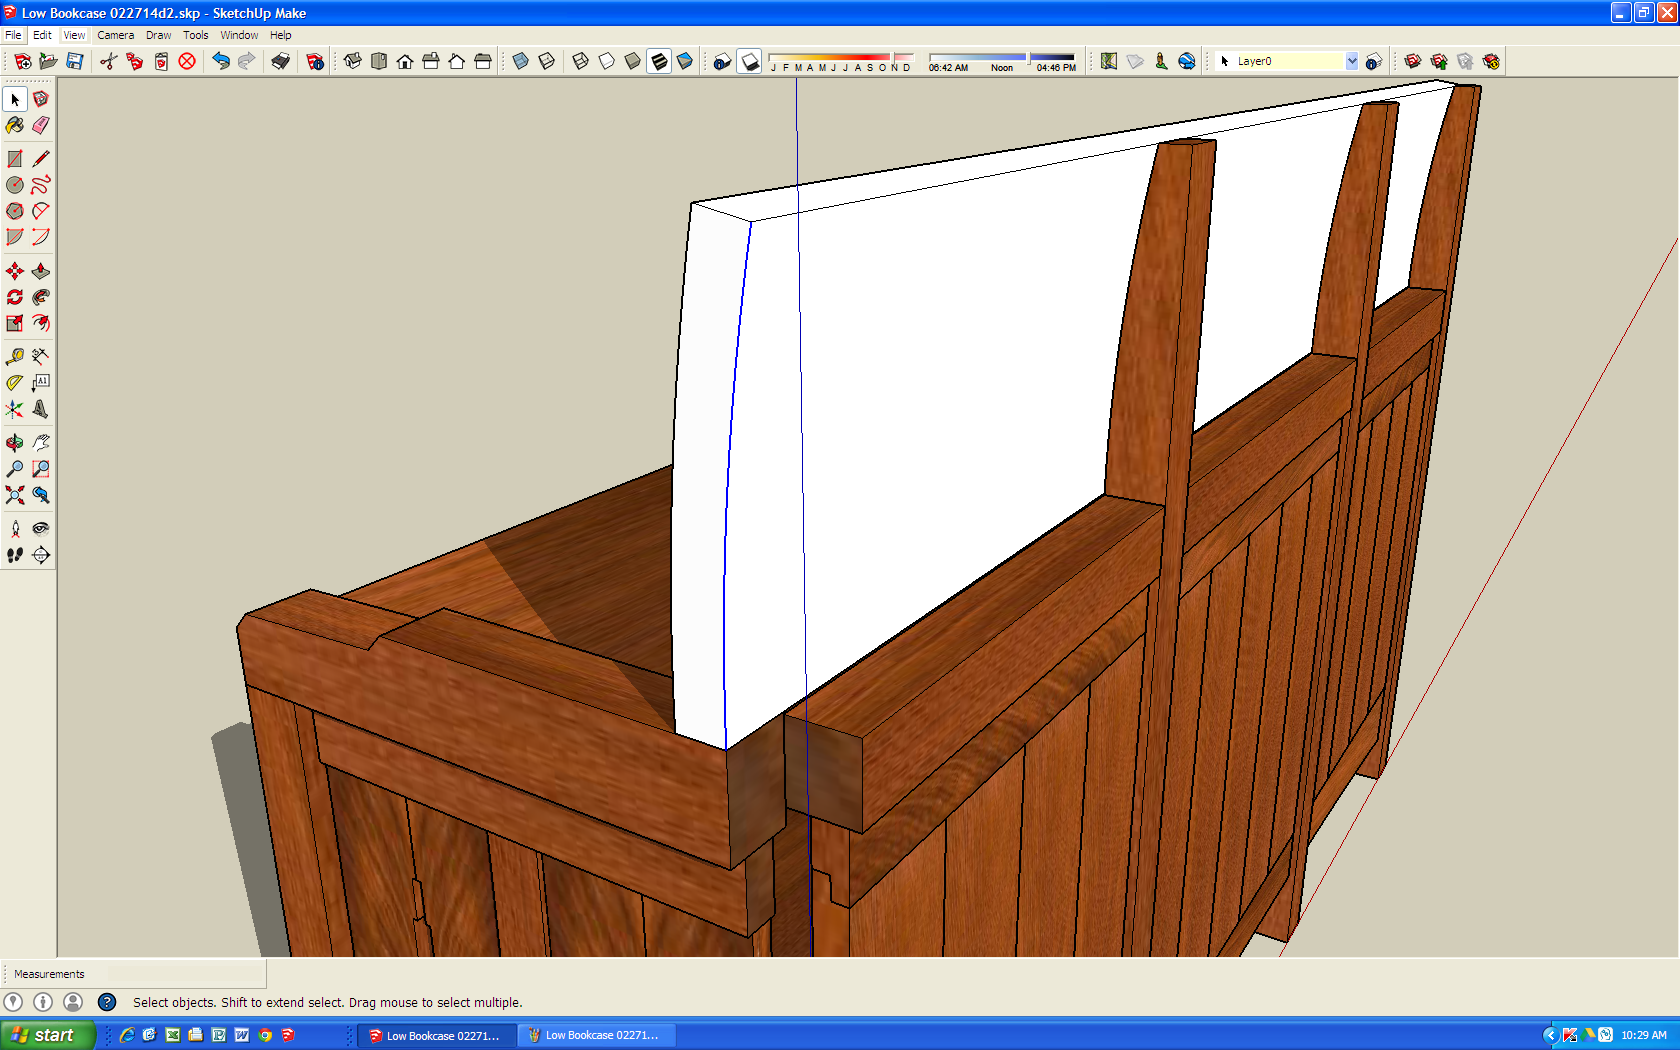 I hide the leg and crest rail, paste in place the curve, offset the curve 1 inch and using push/pull, extrude the shape shown